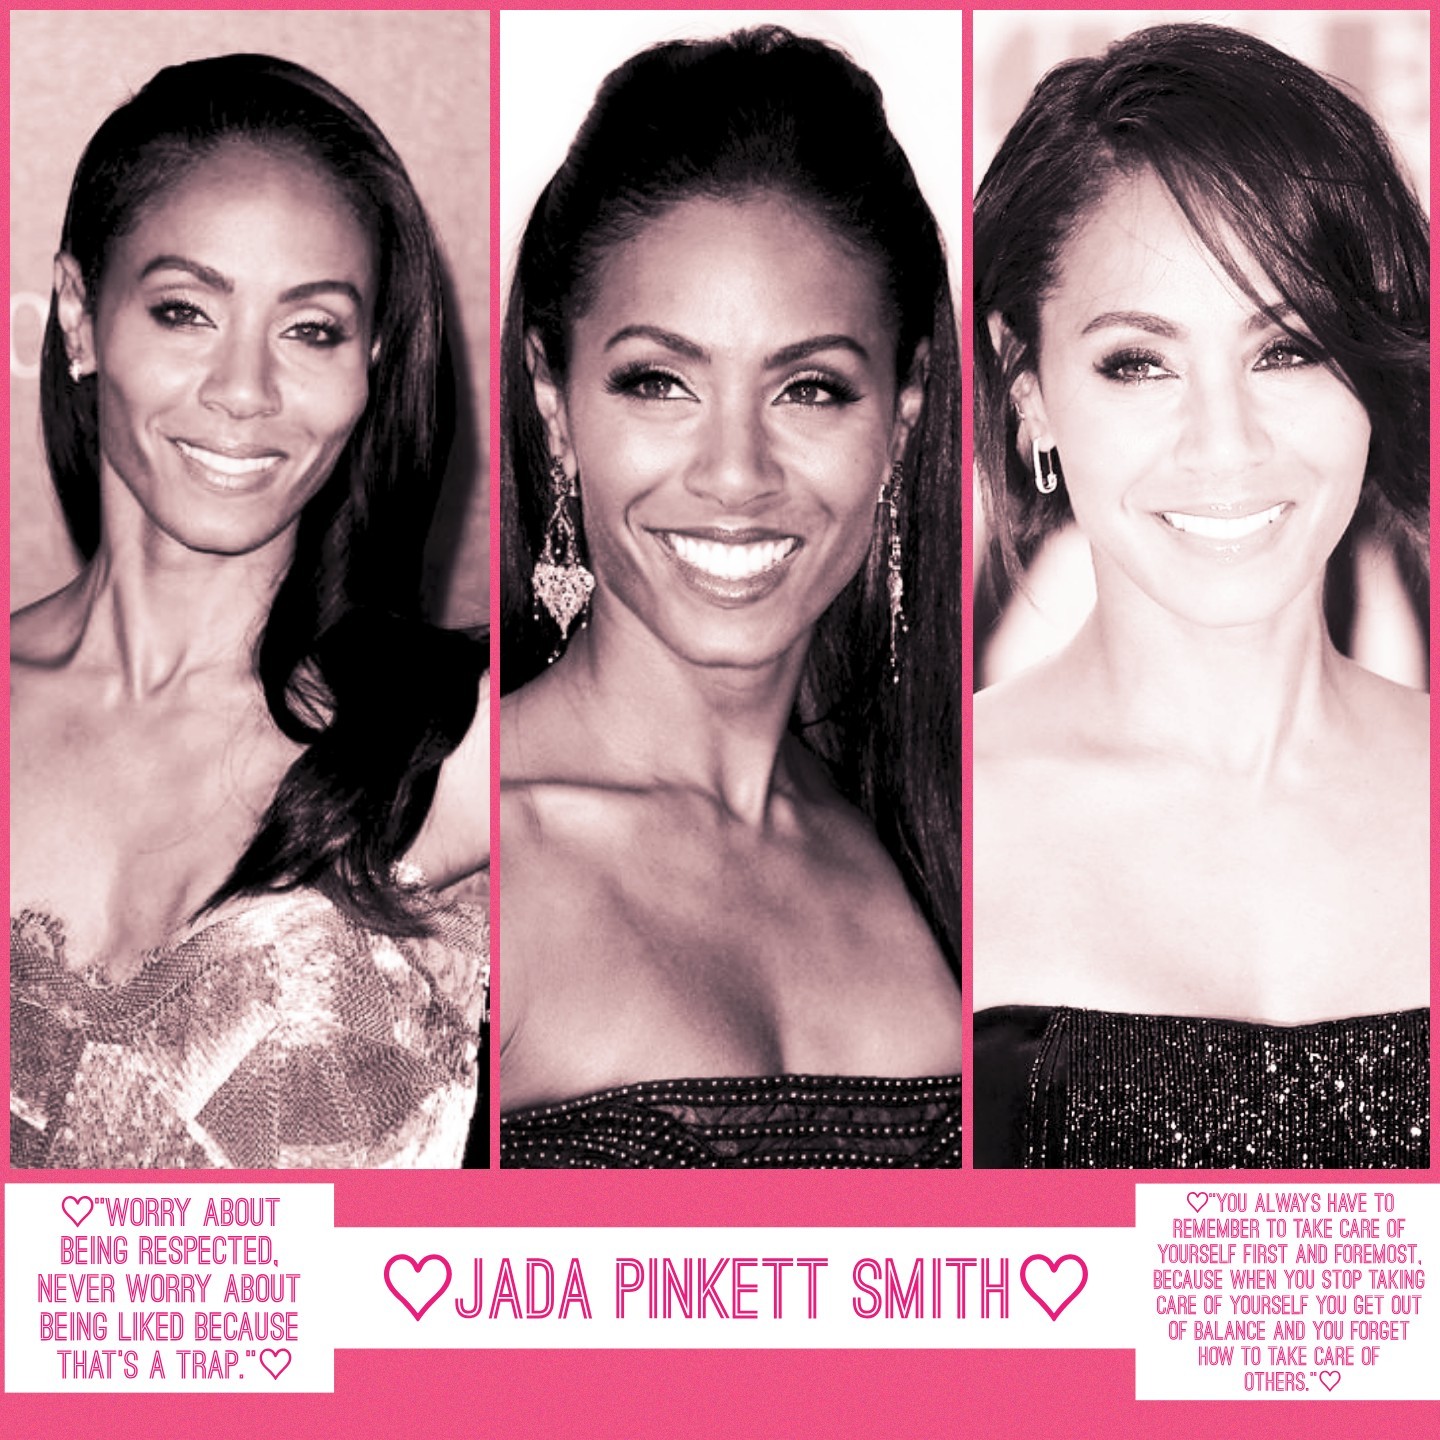 ♡Tap♡
◇
◇
Jada Pinkett Smith is a absolute queen. From Matrix to Gotham.